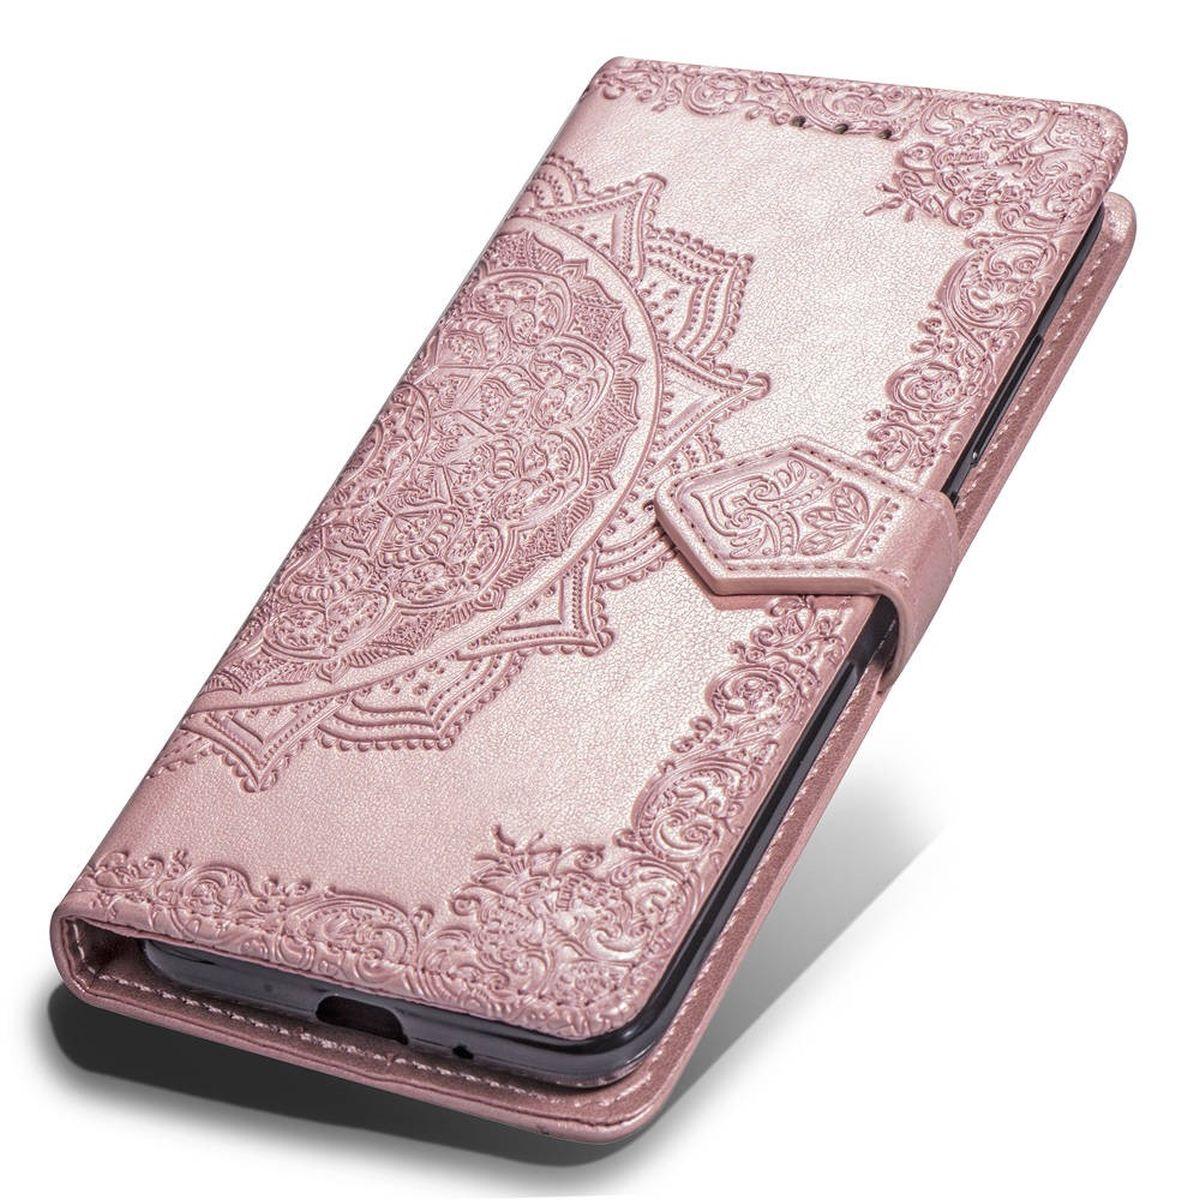 Bookcover, Apple, Rosegold Max, Muster, mit Xs Klapphülle Mandala iPhone COVERKINGZ